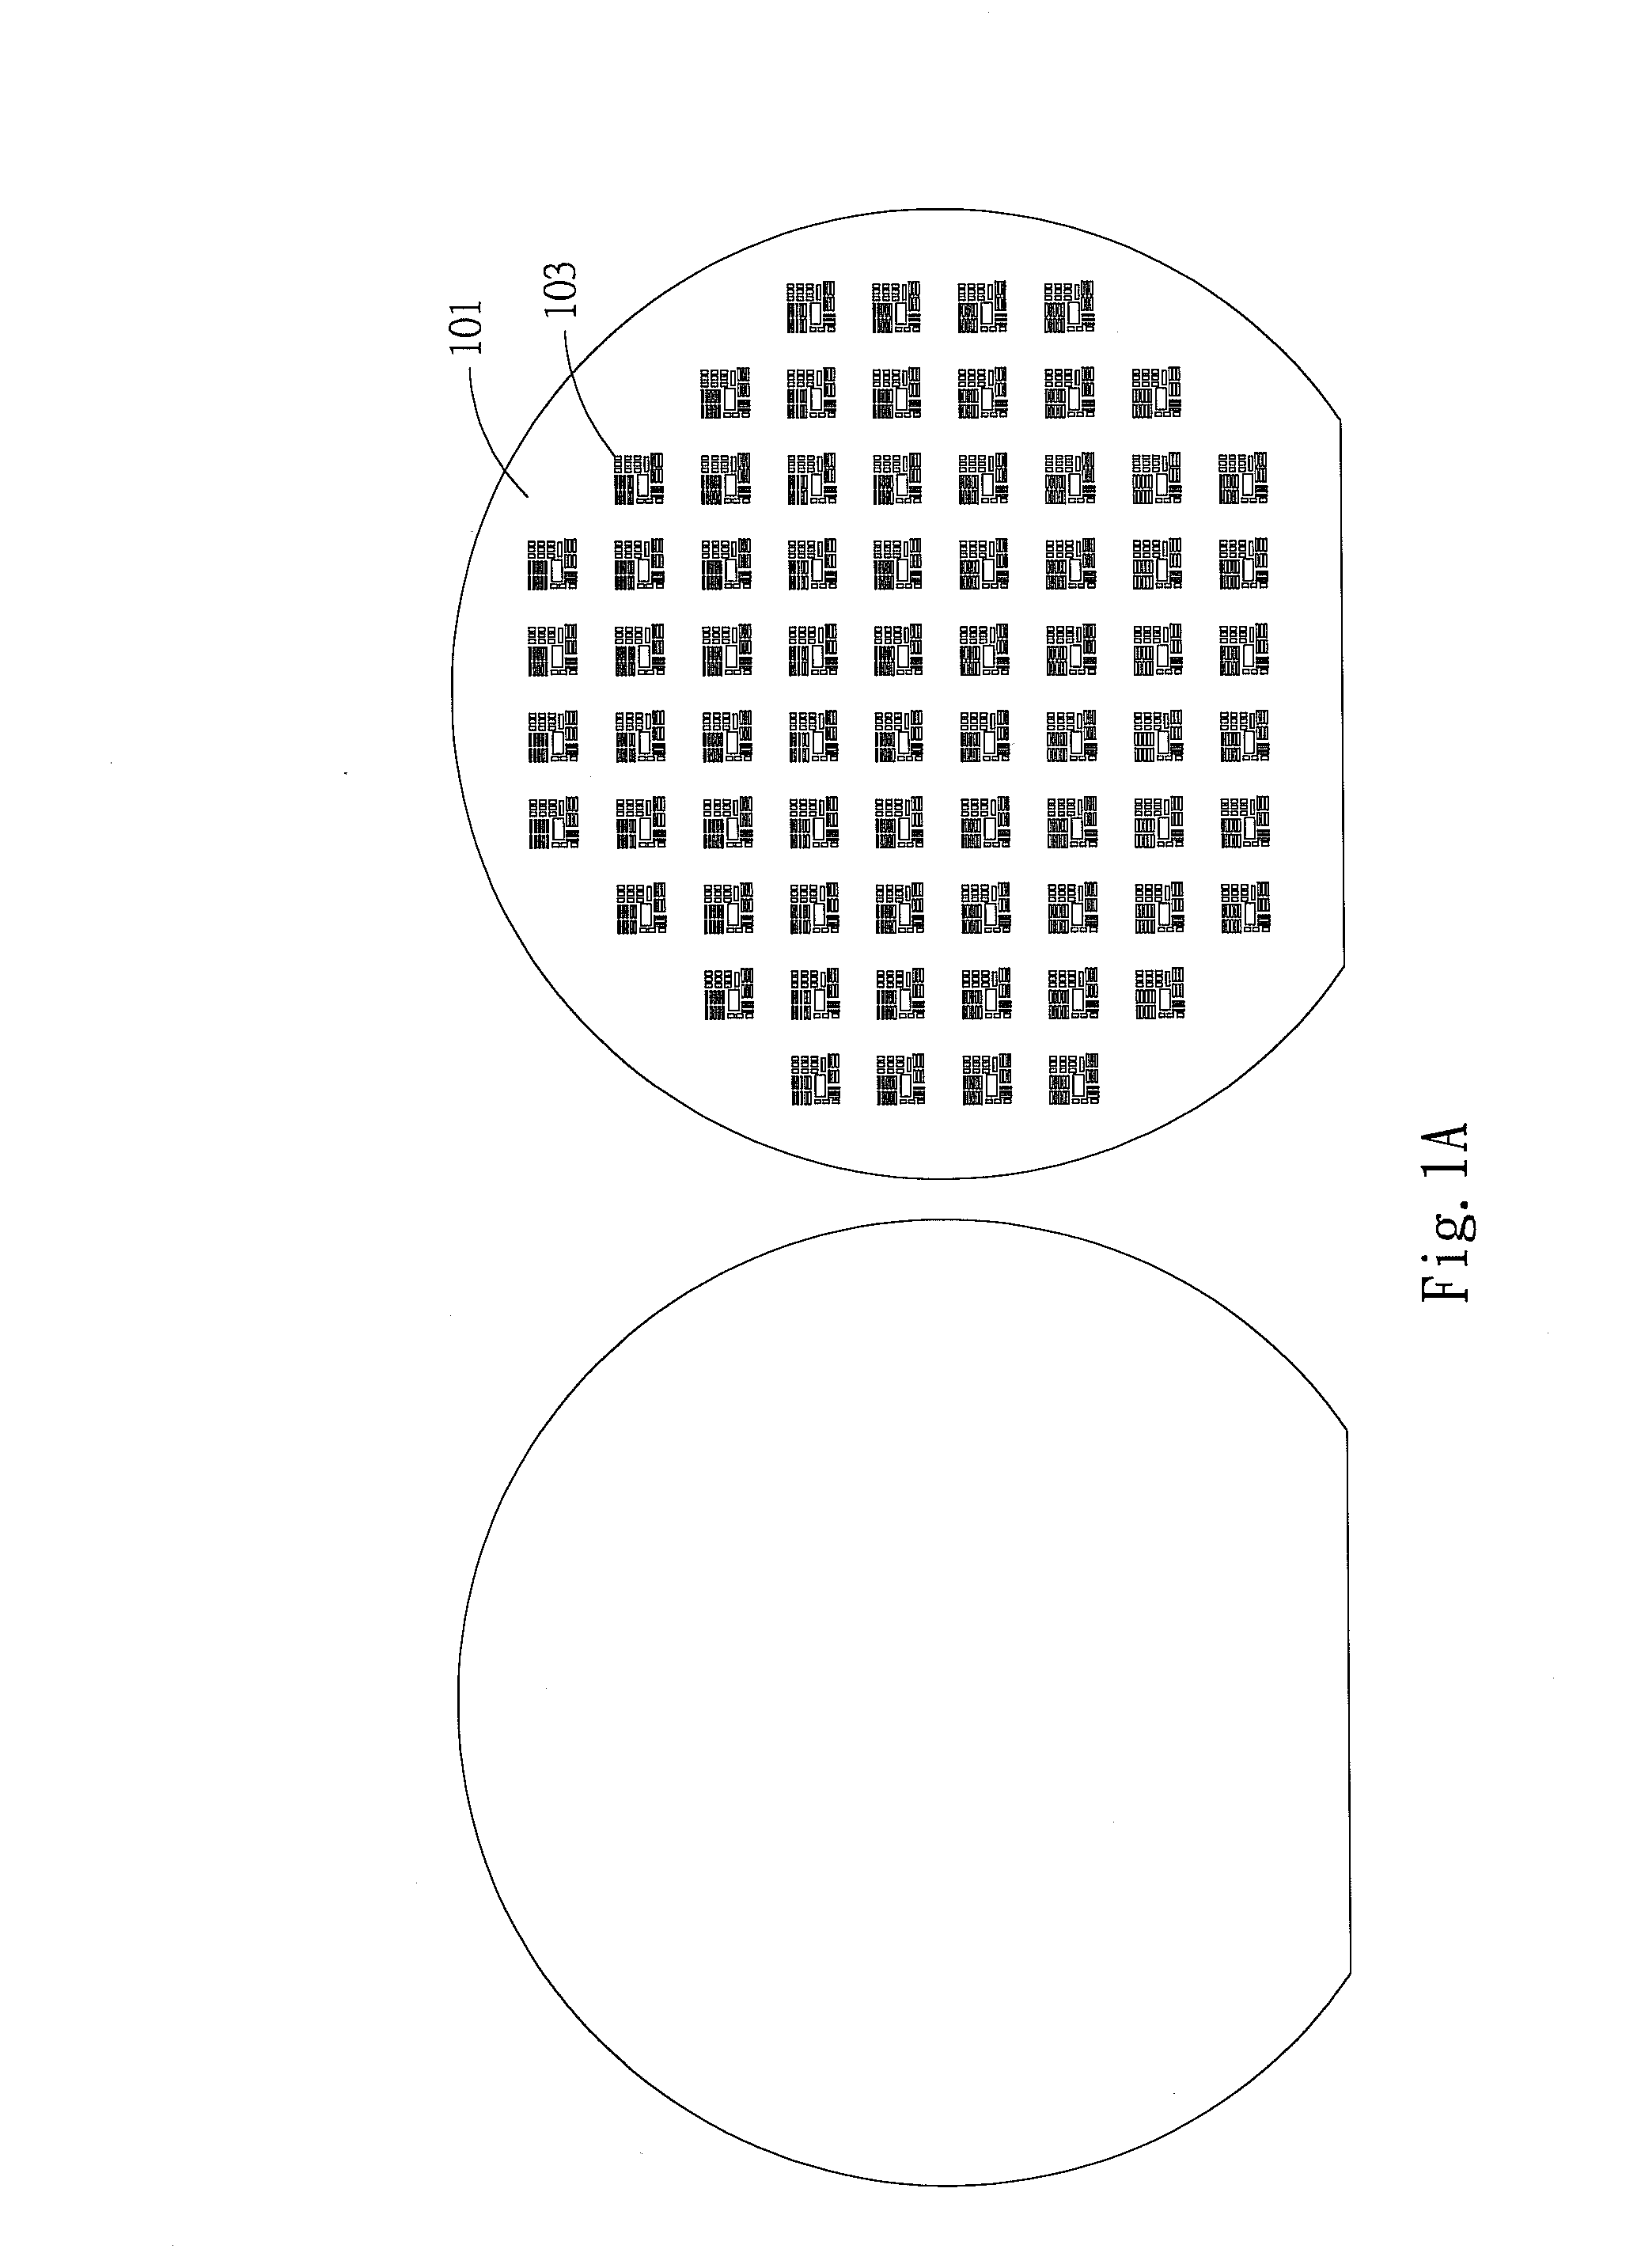 Structure of semiconductor chips with enhanced die strength and a fabrication method thereof